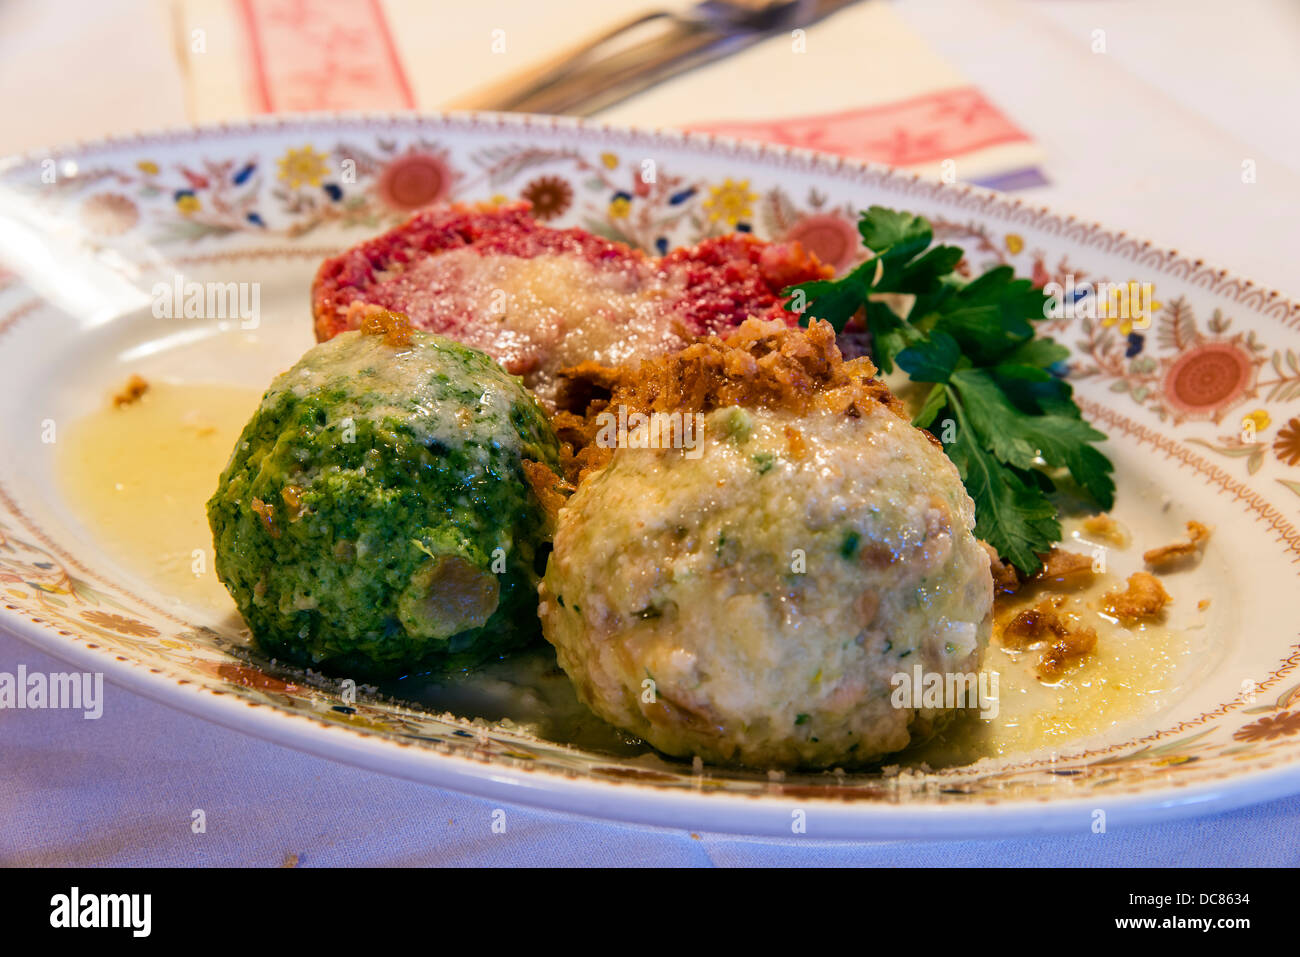 Knödel or Canederli bread dumplings, a typical speciality of Alto Adige or South Tyrol, Italy Stock Photo